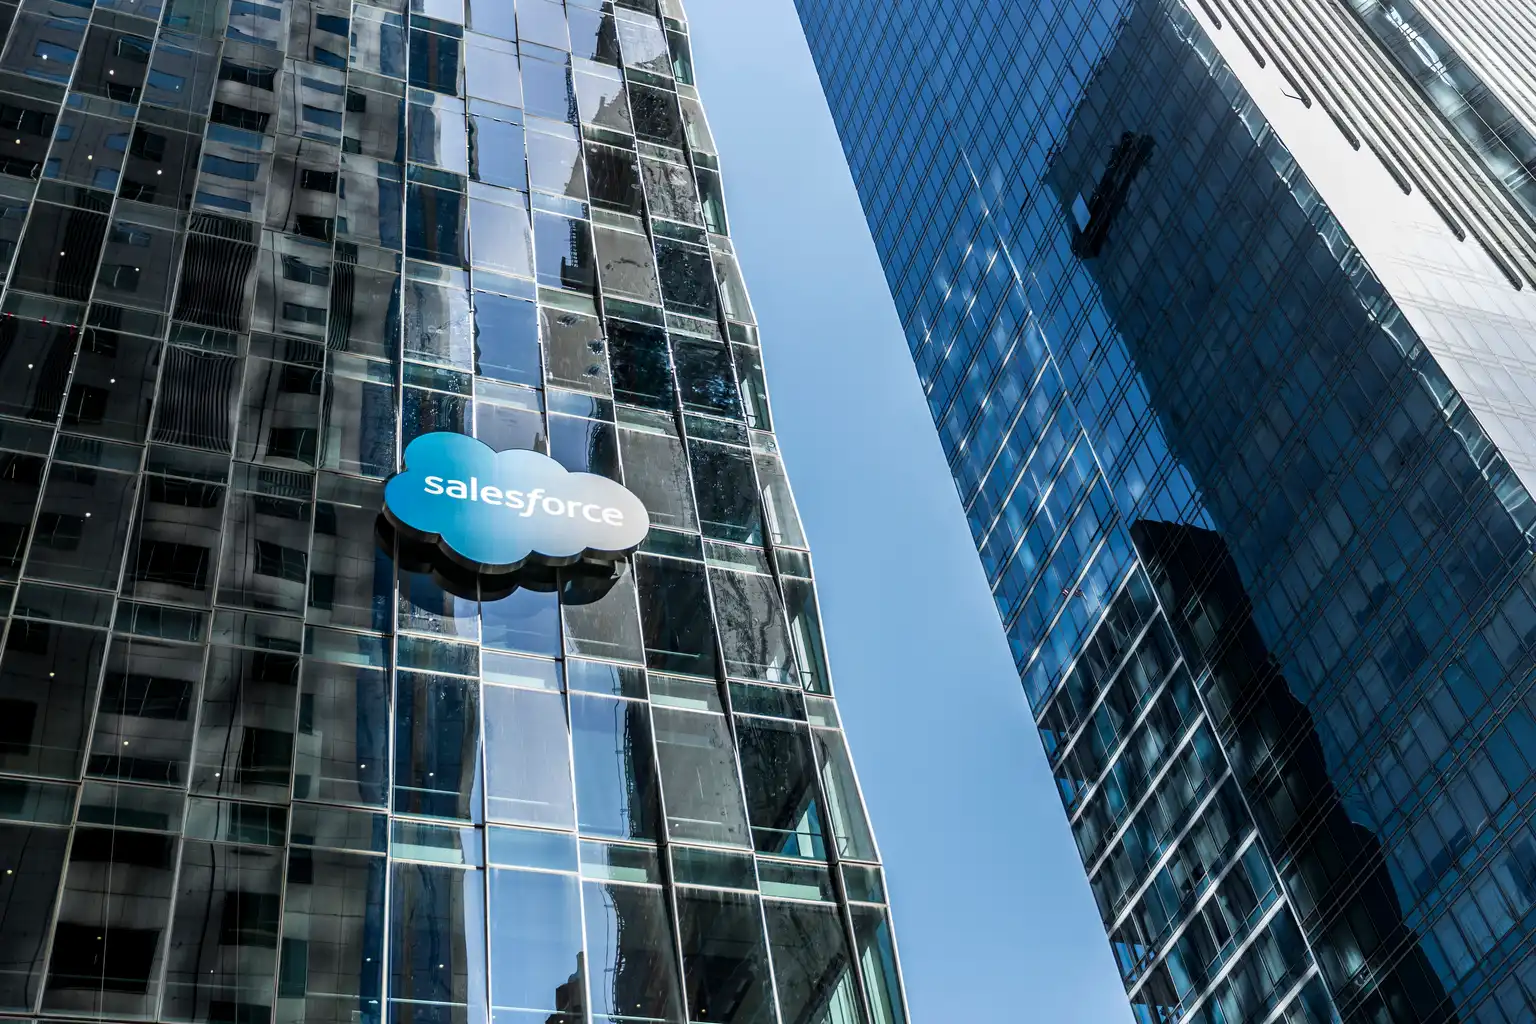 Salesforce: On Track To Deliver Solid Revenue Growth - Seeking Alpha